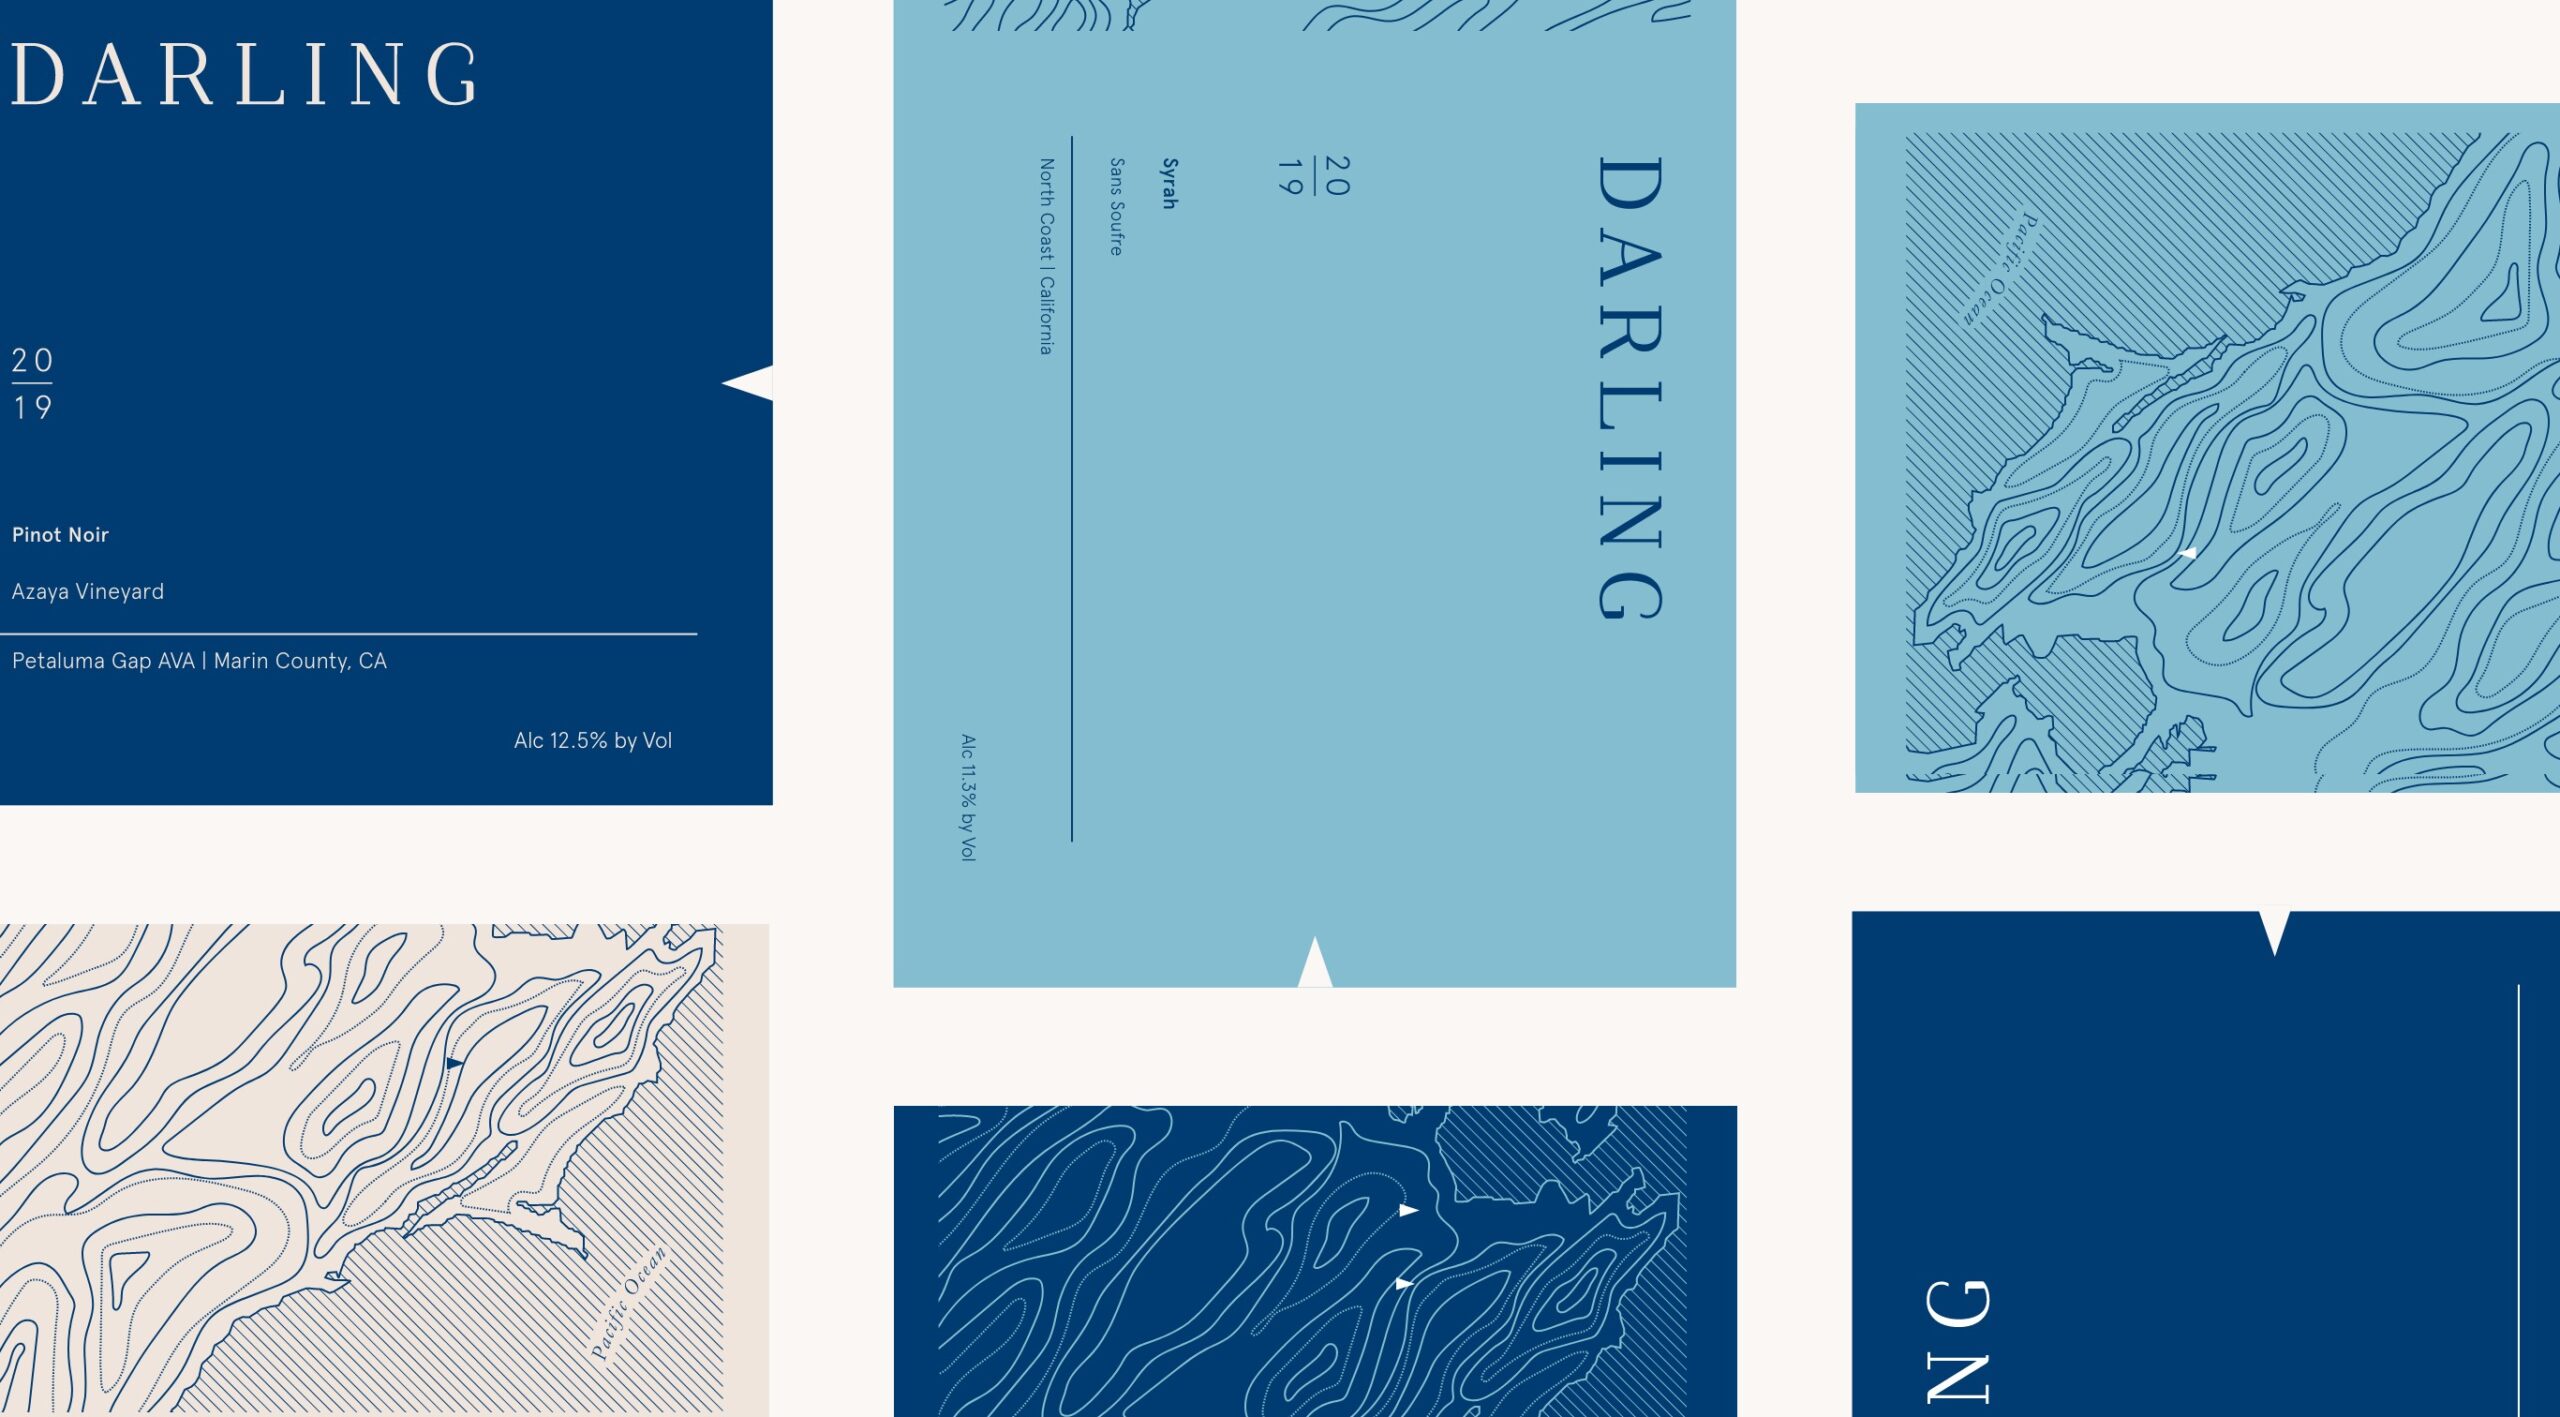 Grid of labels from Darling Wines packaging